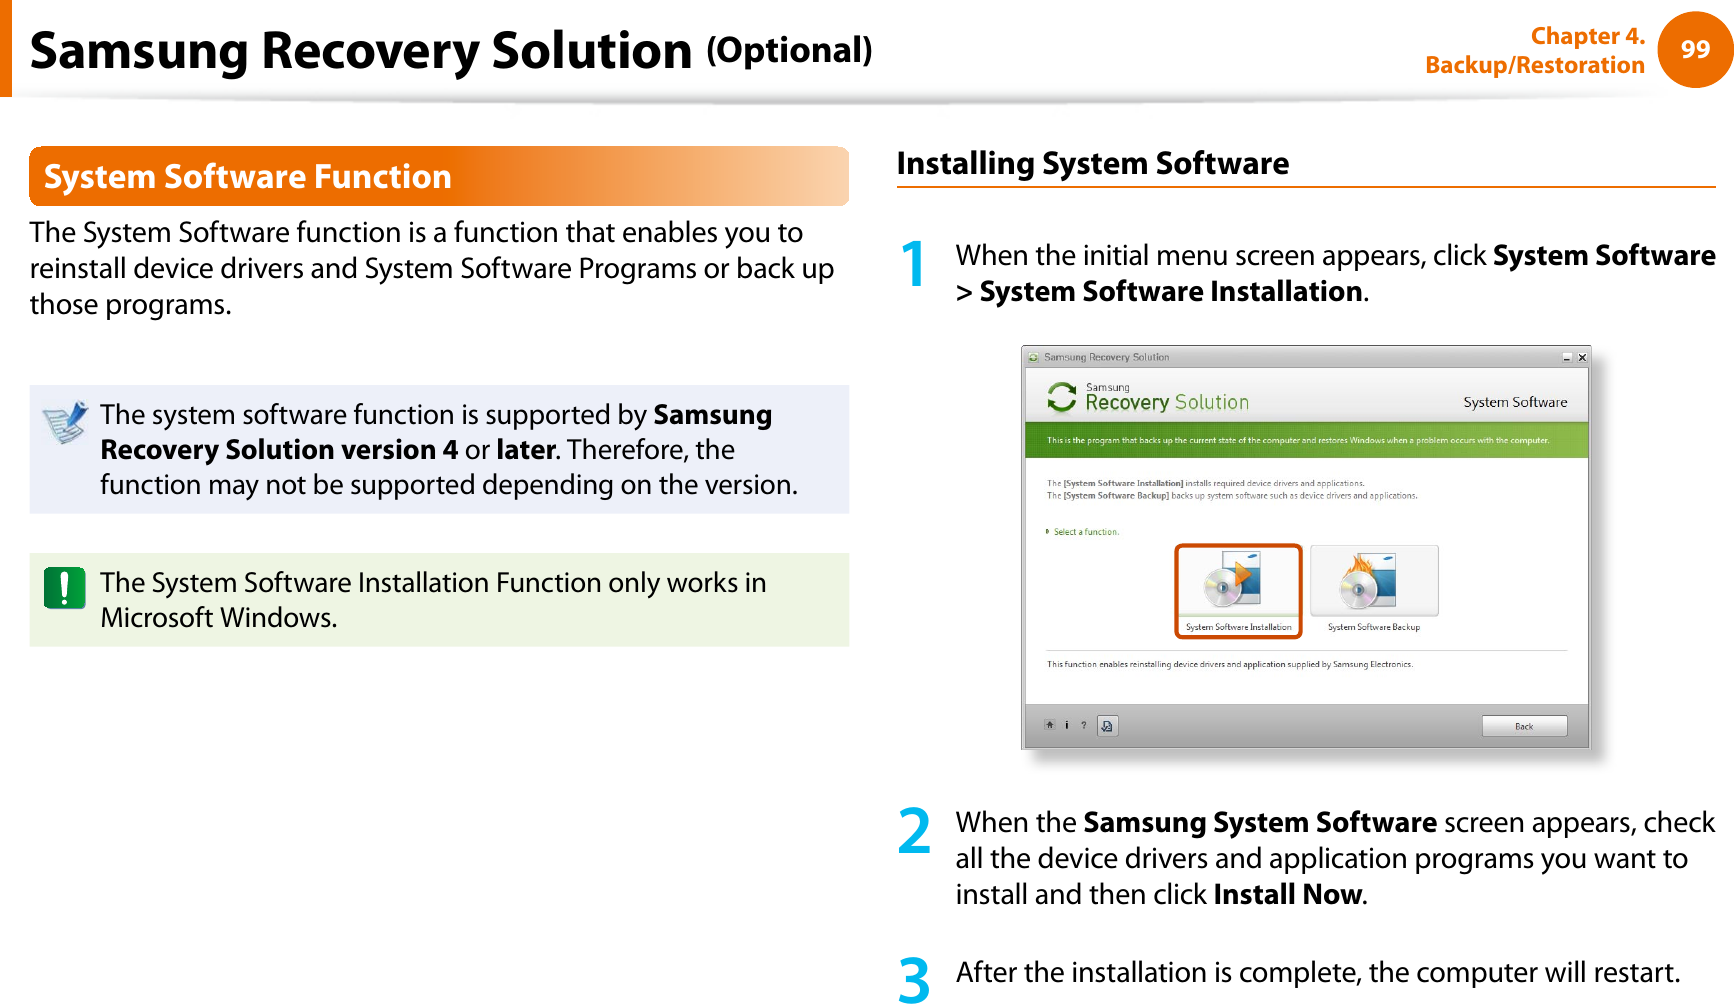 99Chapter 4. Backup/RestorationSystem Software FunctionThe System Software function is a function that enables you to reinstall device drivers and System Software Programs or back up those programs. The system software function is supported by Samsung Recovery Solution version 4 or later. Therefore, the function may not be supported depending on the version.The System Software Installation Function only works in Microsoft Windows.Installing System Software1When the initial menu screen appears, click System Software &gt; System Software Installation.2When the Samsung System Software screen appears, check all the device drivers and application programs you want to install and then click Install Now.3After the installation is complete, the computer will restart.Samsung Recovery Solution (Optional)